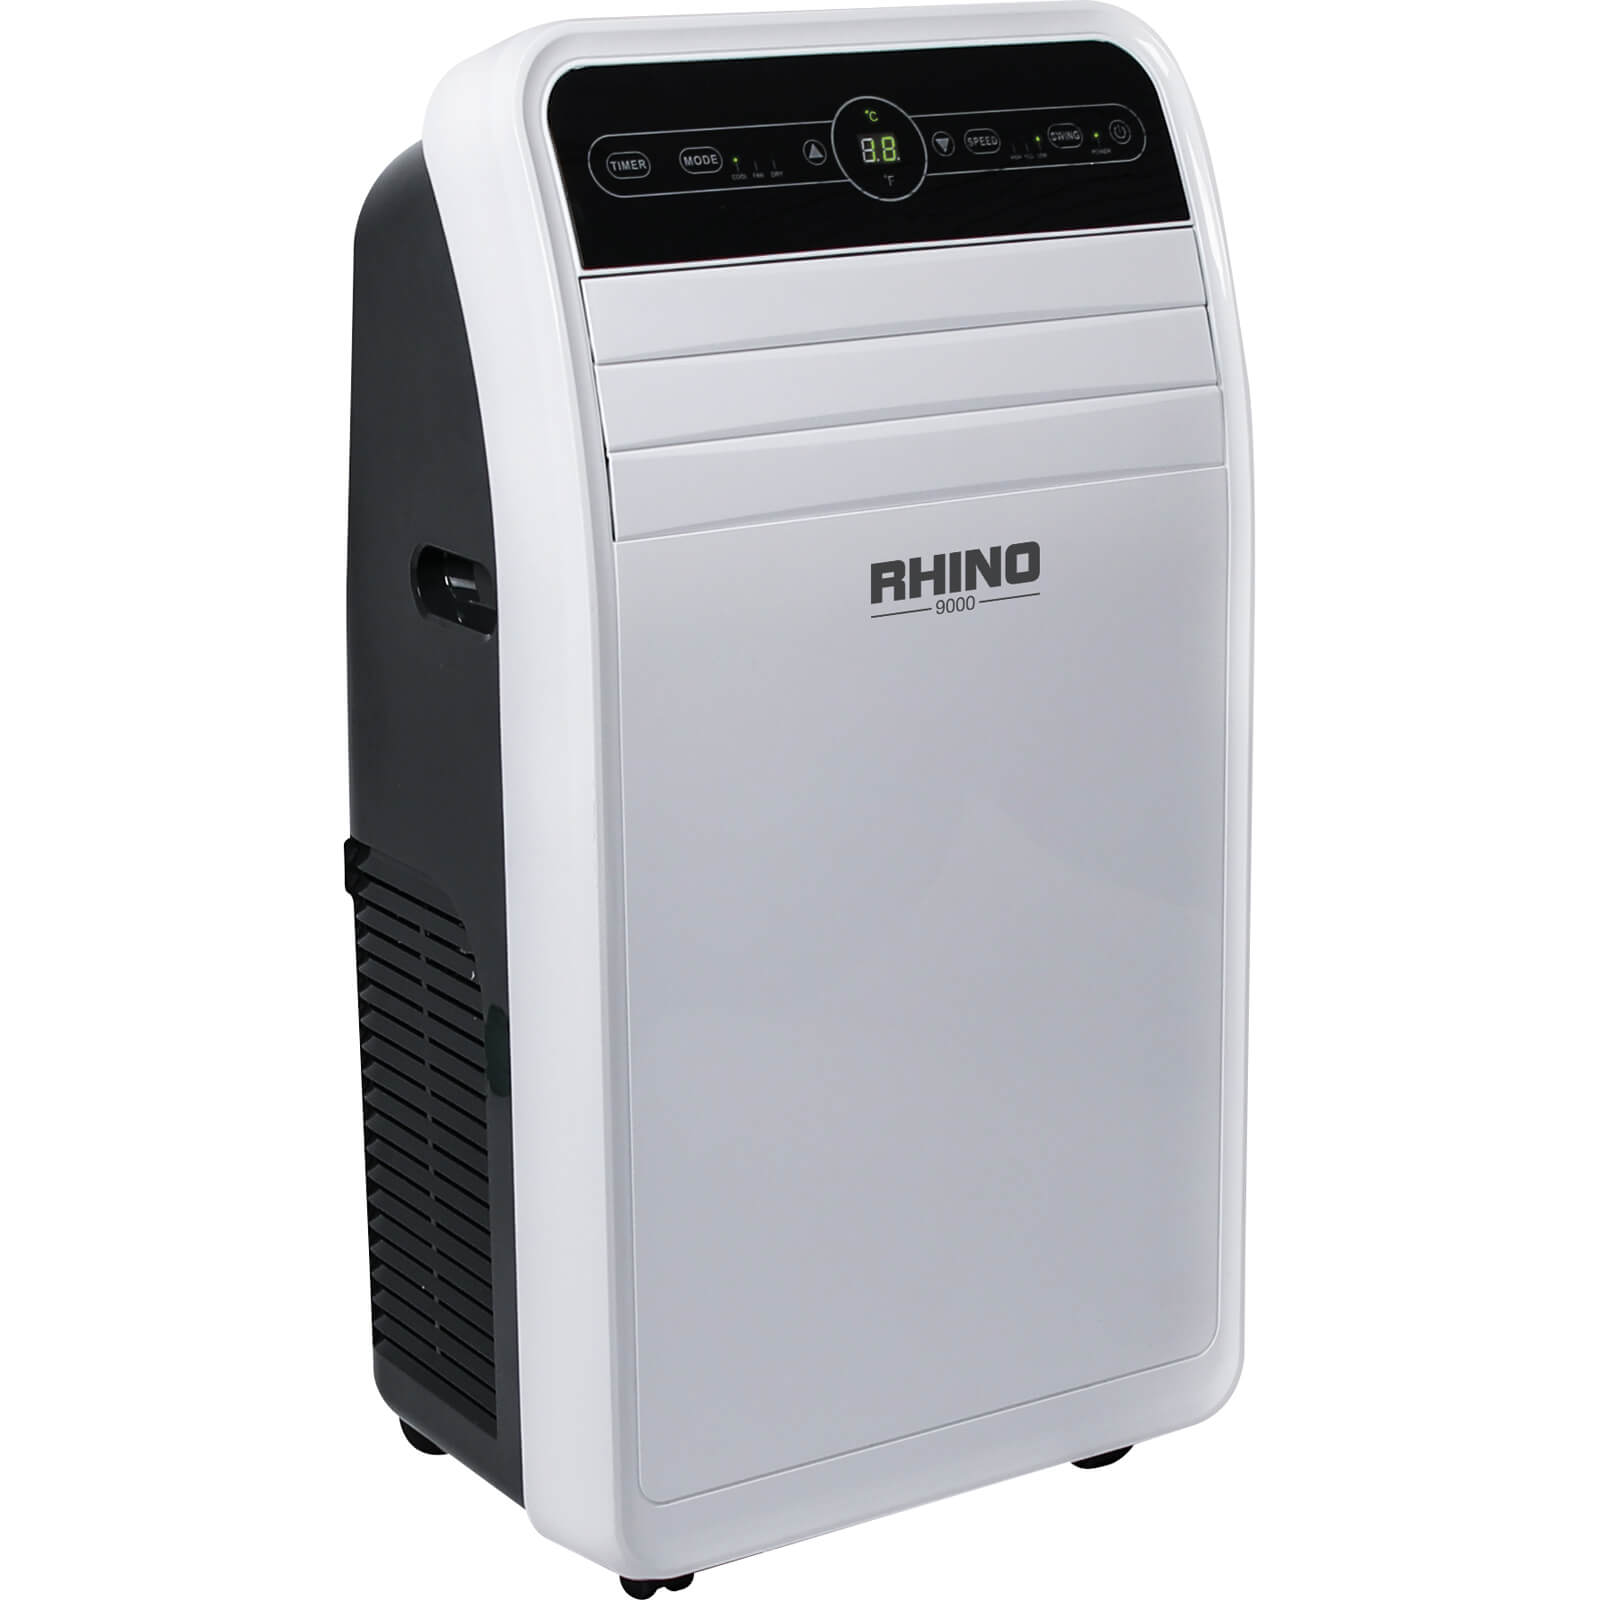 Image of Rhino AC9000 Portable Air Conditioning Unit